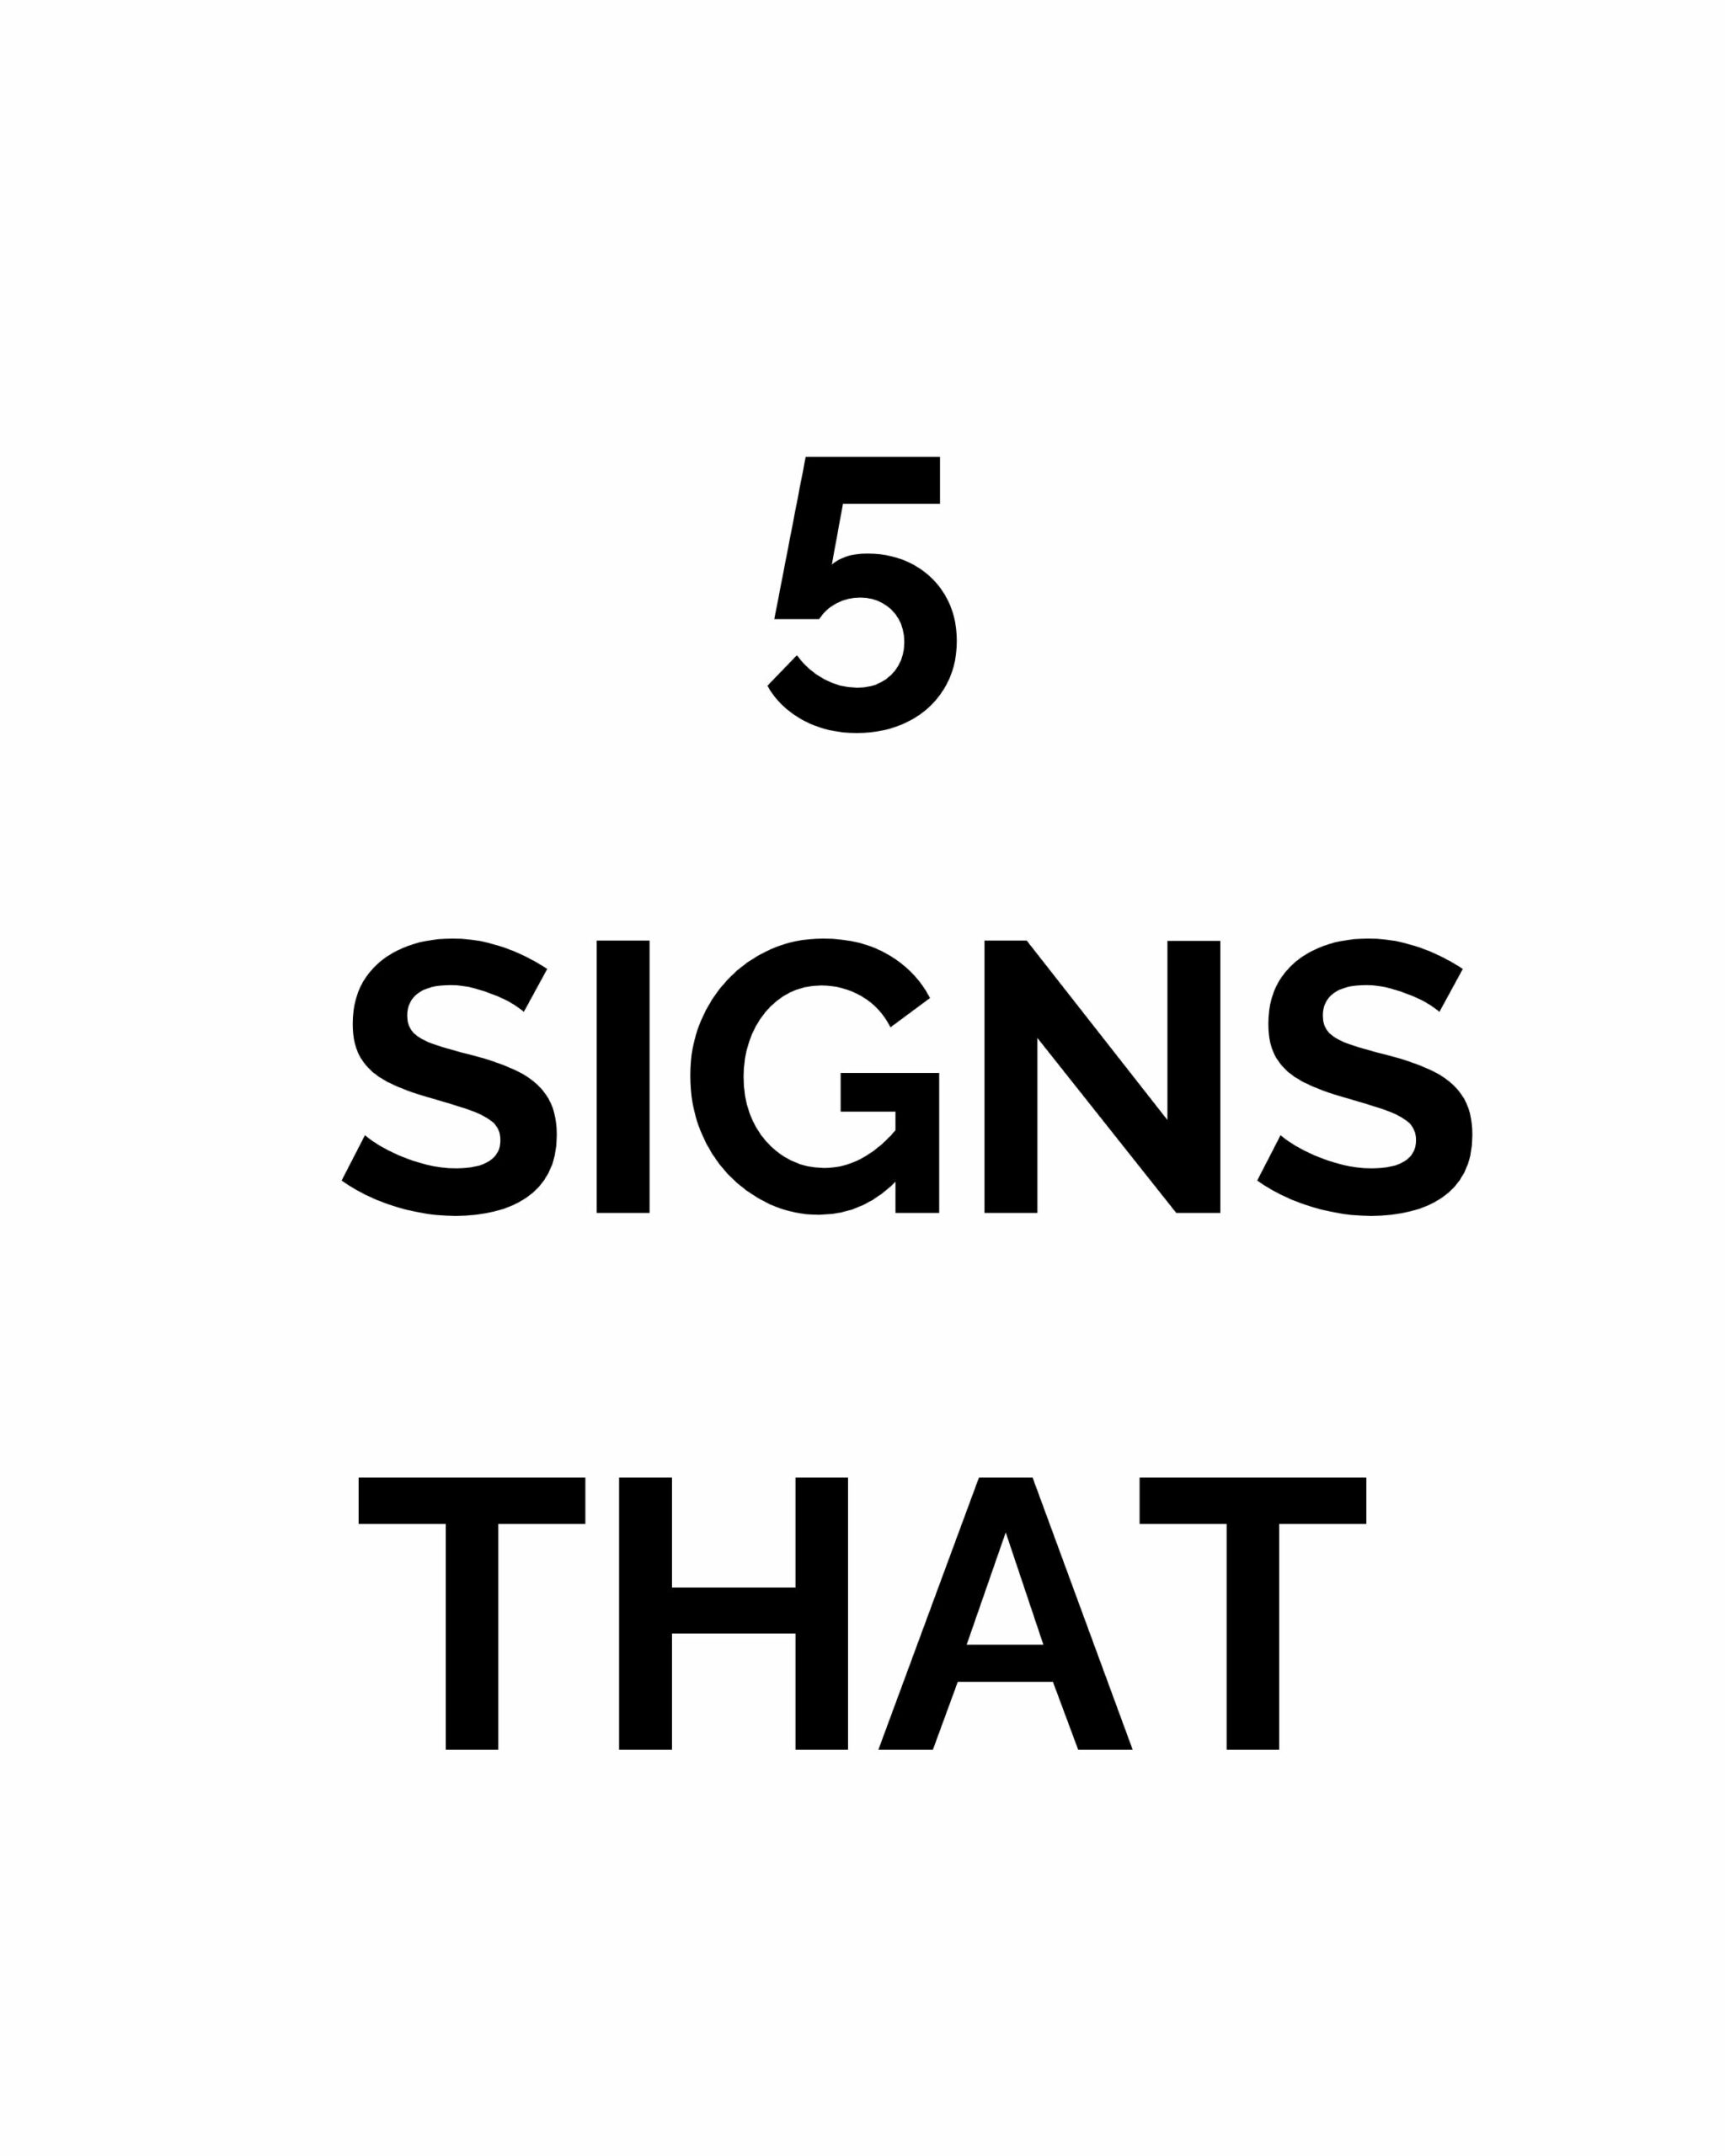 5 Signs That Life After 50 is Your Best Chapter Yet! 📖 Check them out and be surprised!